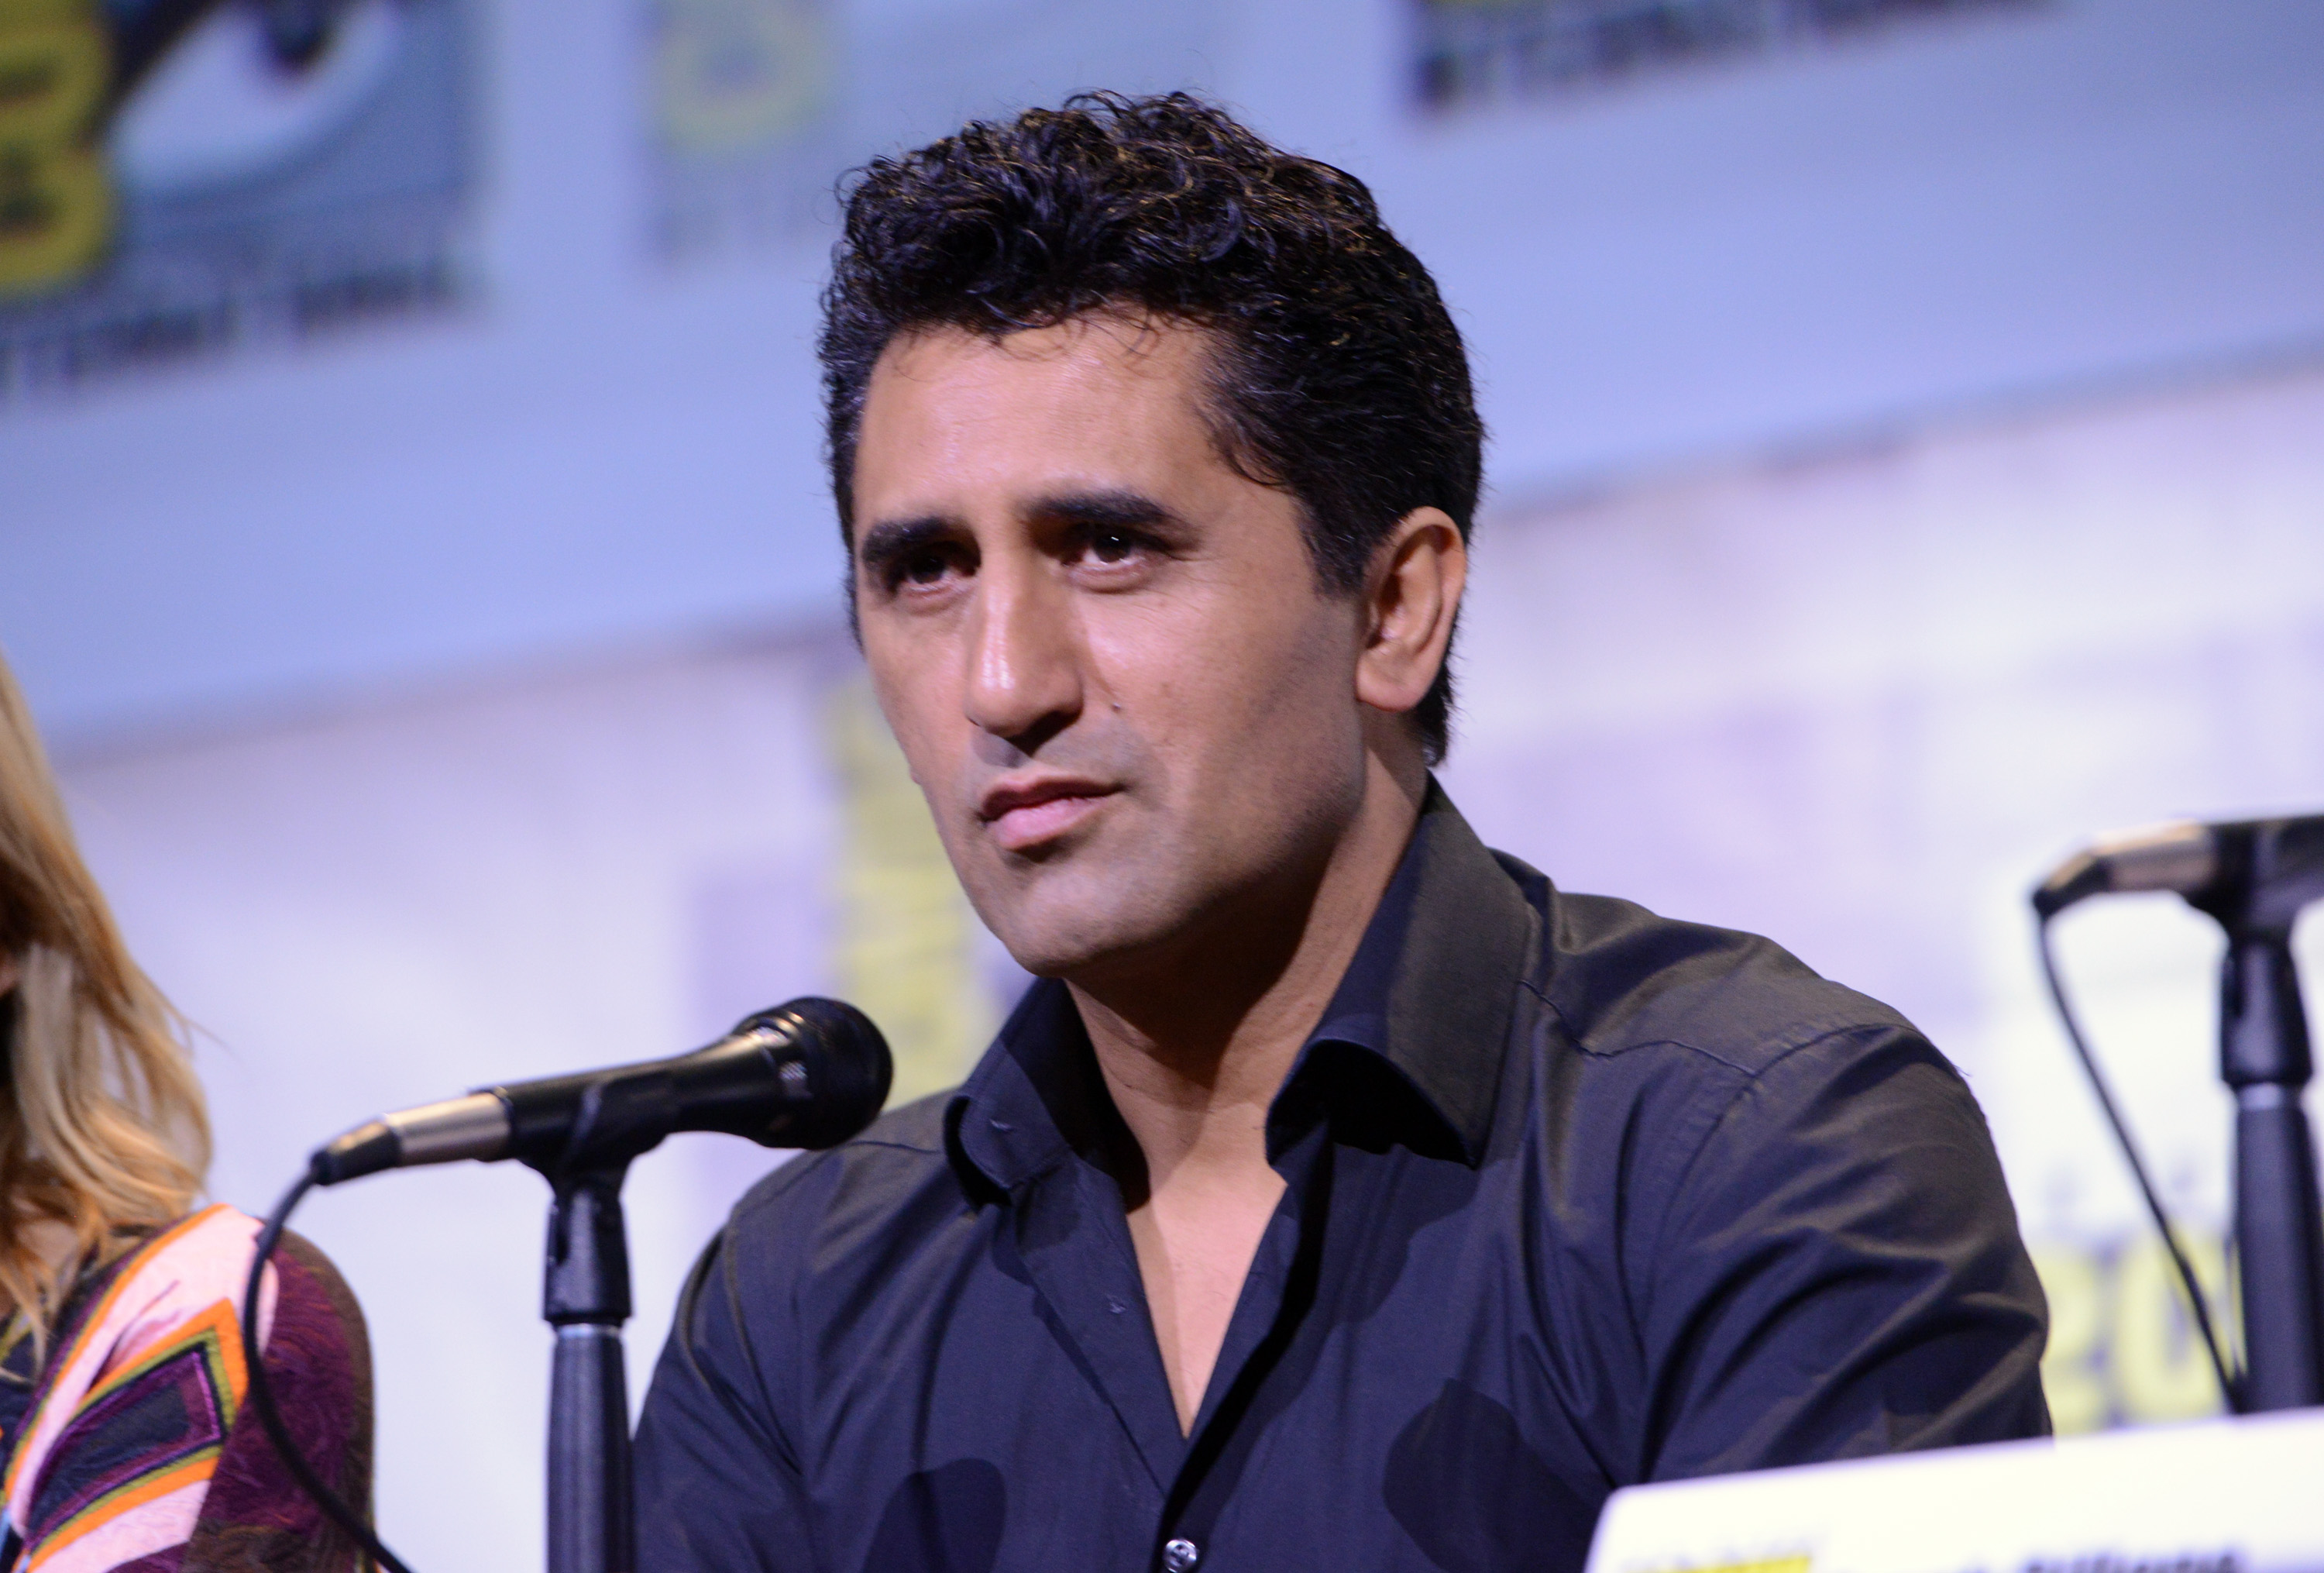 Cliff Curtis at "Fear The Walking Dead" Panel during Comic-Con International 2016 on July 22, 2016, in San Diego, California. | Source: Getty Images